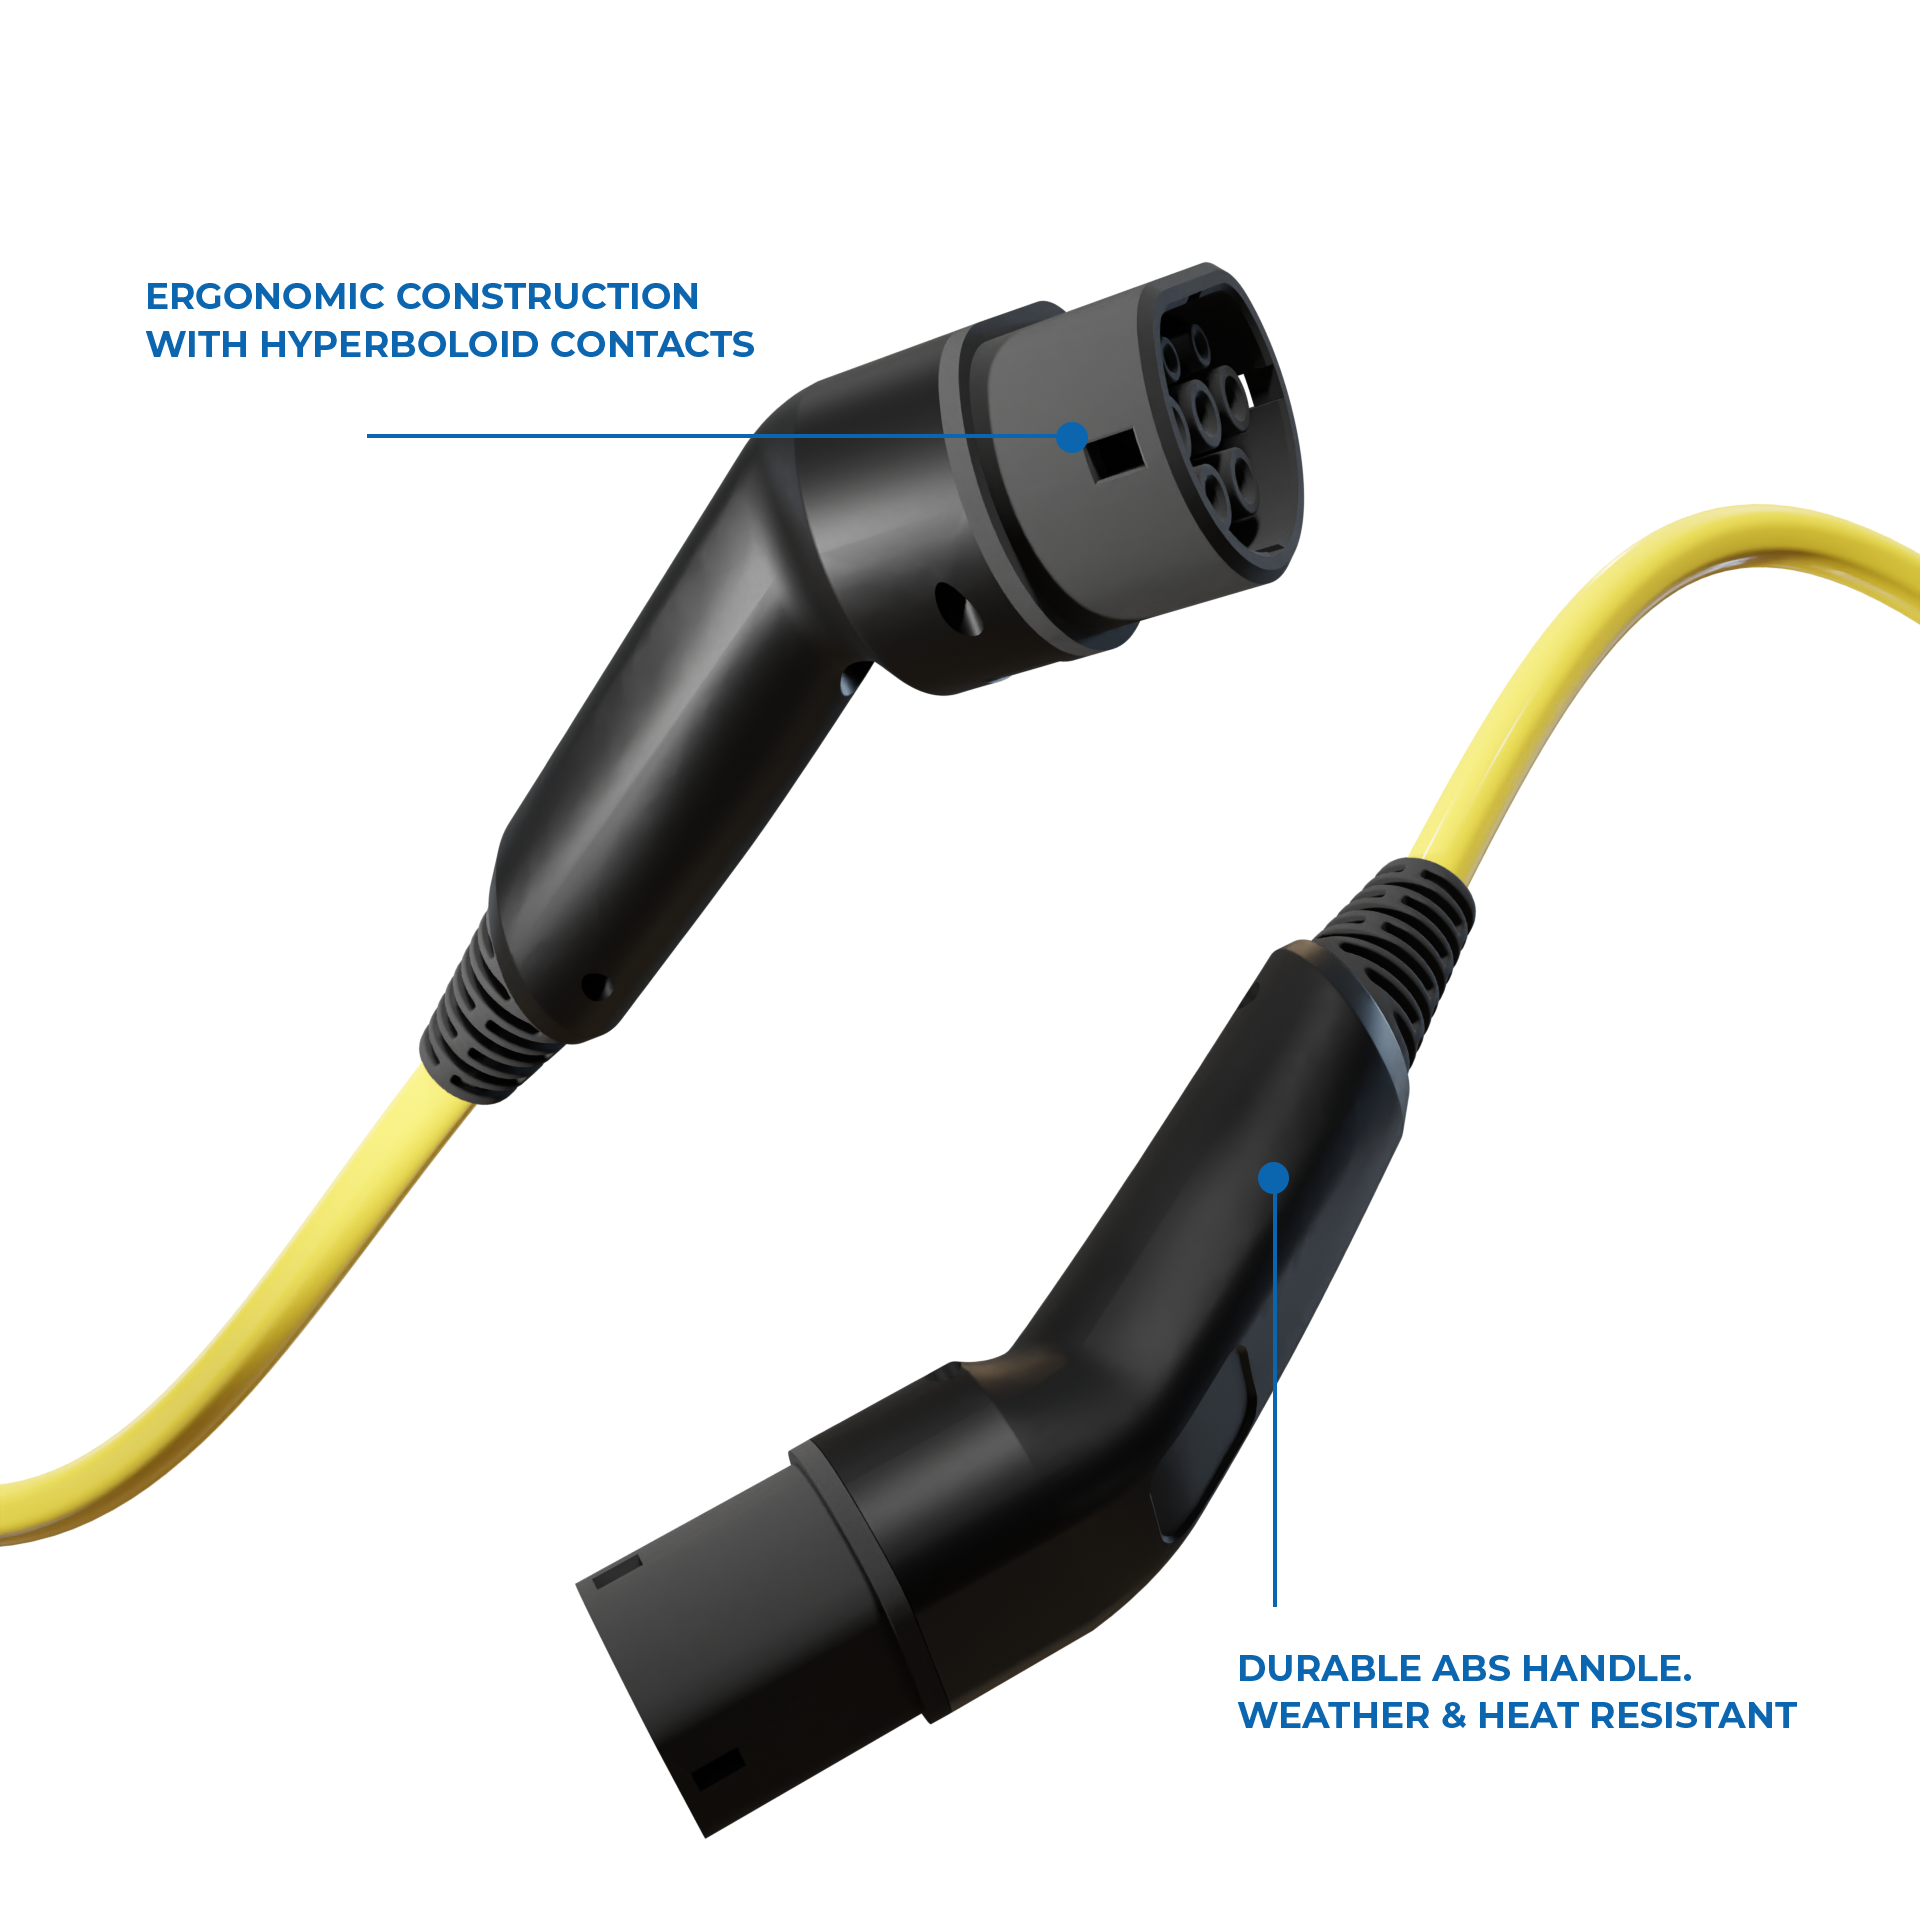 3 Phase Type 2 Tethered EV Charging Cable